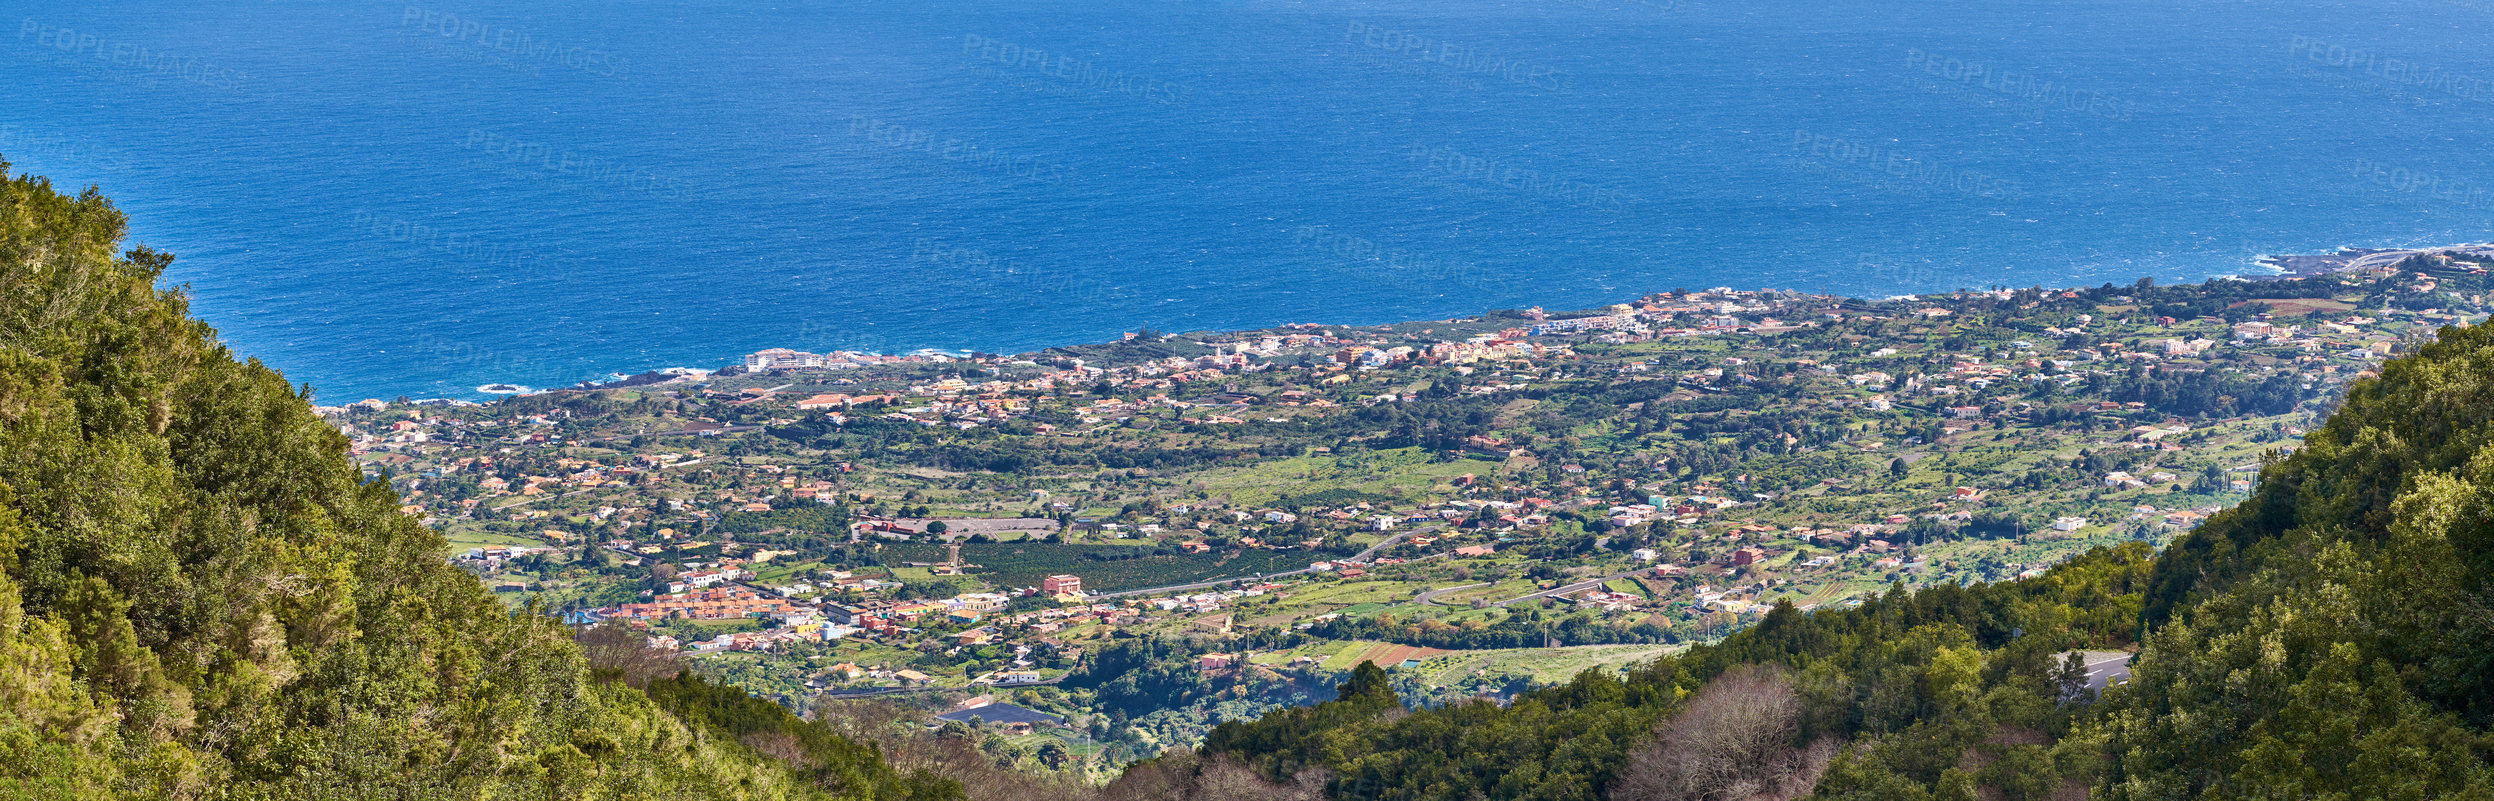 Buy stock photo Landscape of a coastal city between hills and mountains from above. A peaceful village beside calm blue ocean water in the Canary Islands. High angle view of Los Llanos, La Palma in summer